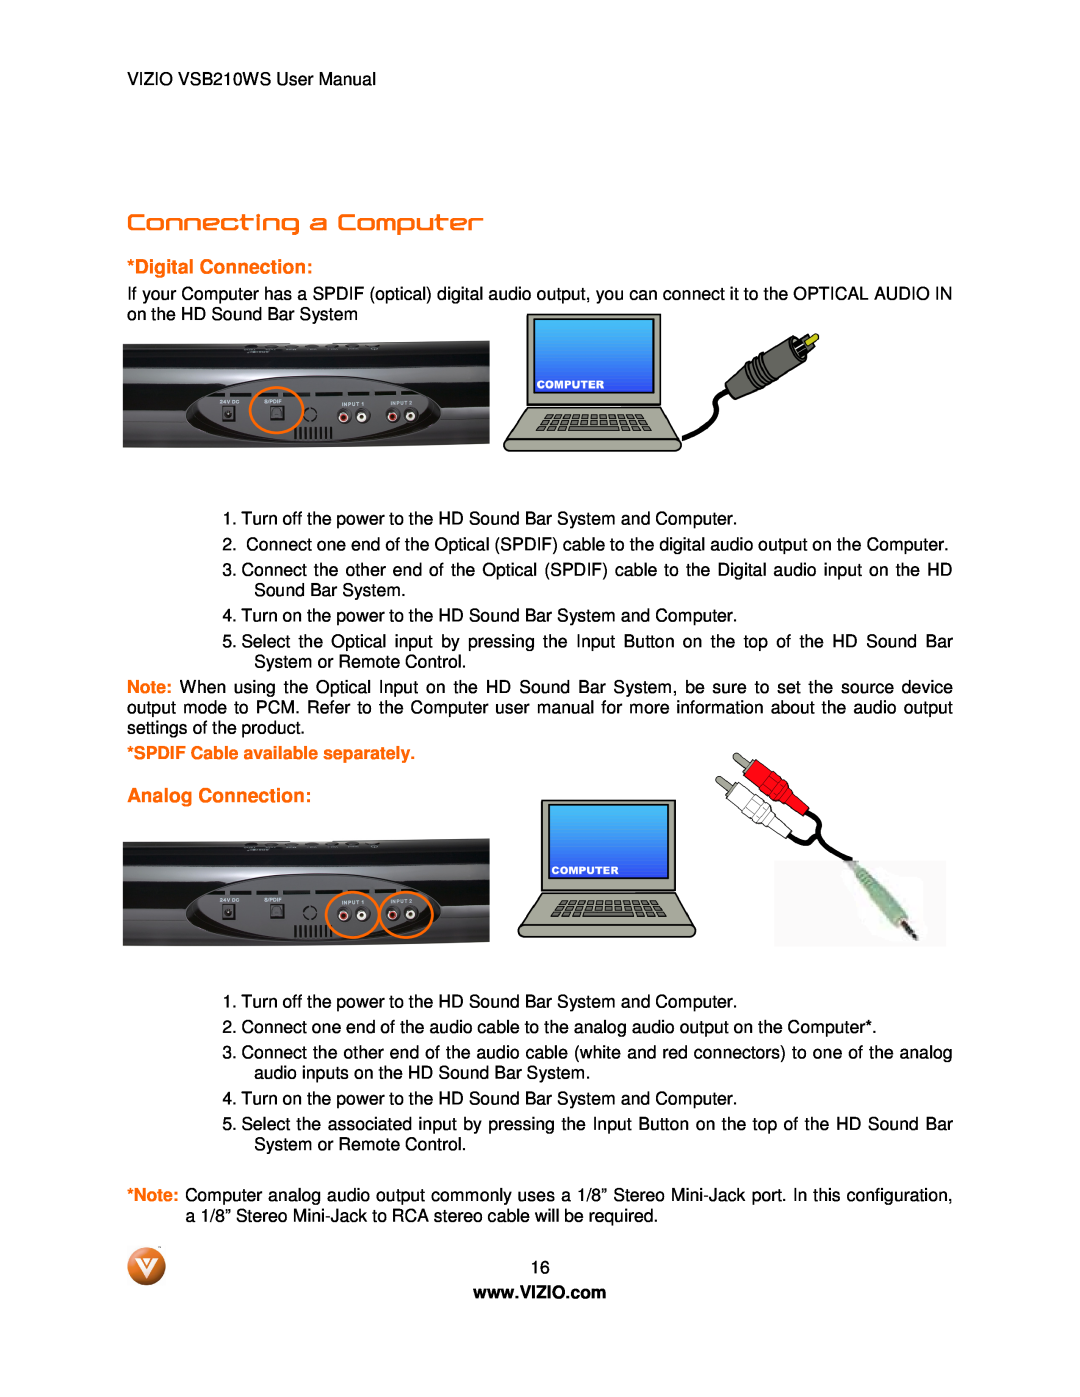 Vizio VSB210WS user manual Connecting a Computer, Digital Connection, Analog Connection, SPDIF Cable available separately 